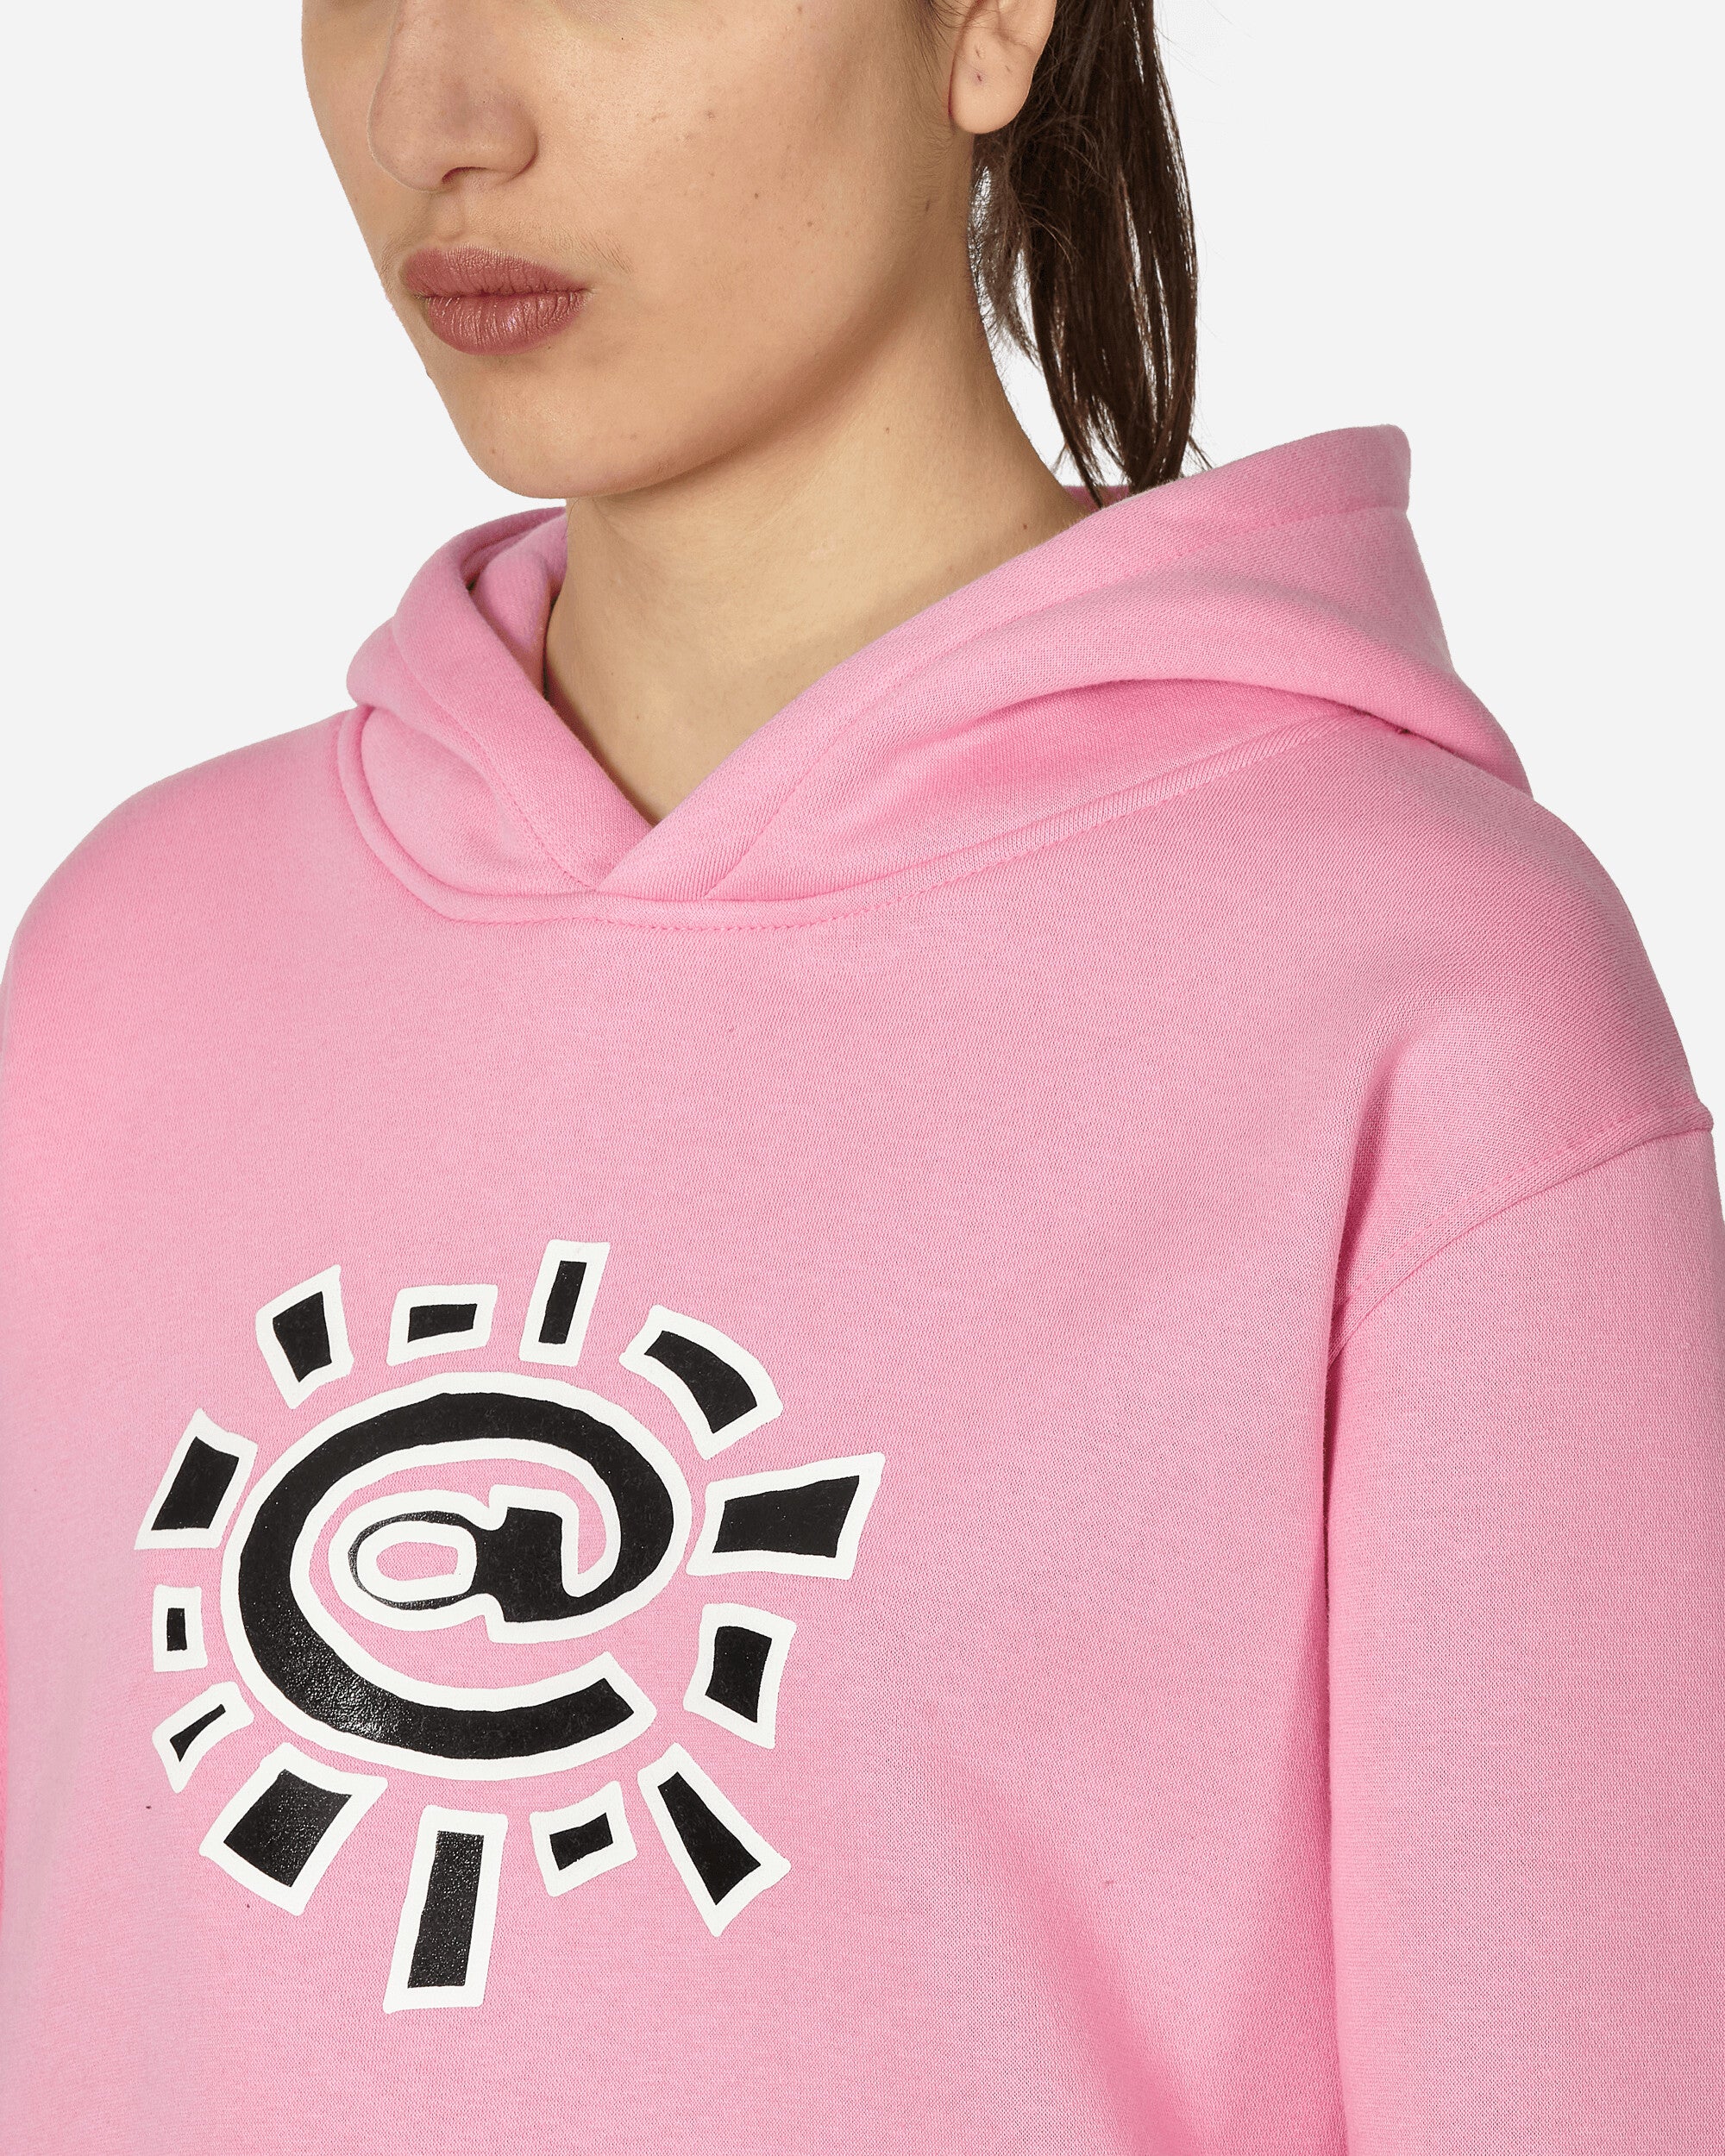 Always Do What You Should Do Sun Hoodie Light Pink Sweatshirts Hoodies SUN HOODIE LIGHTPINK